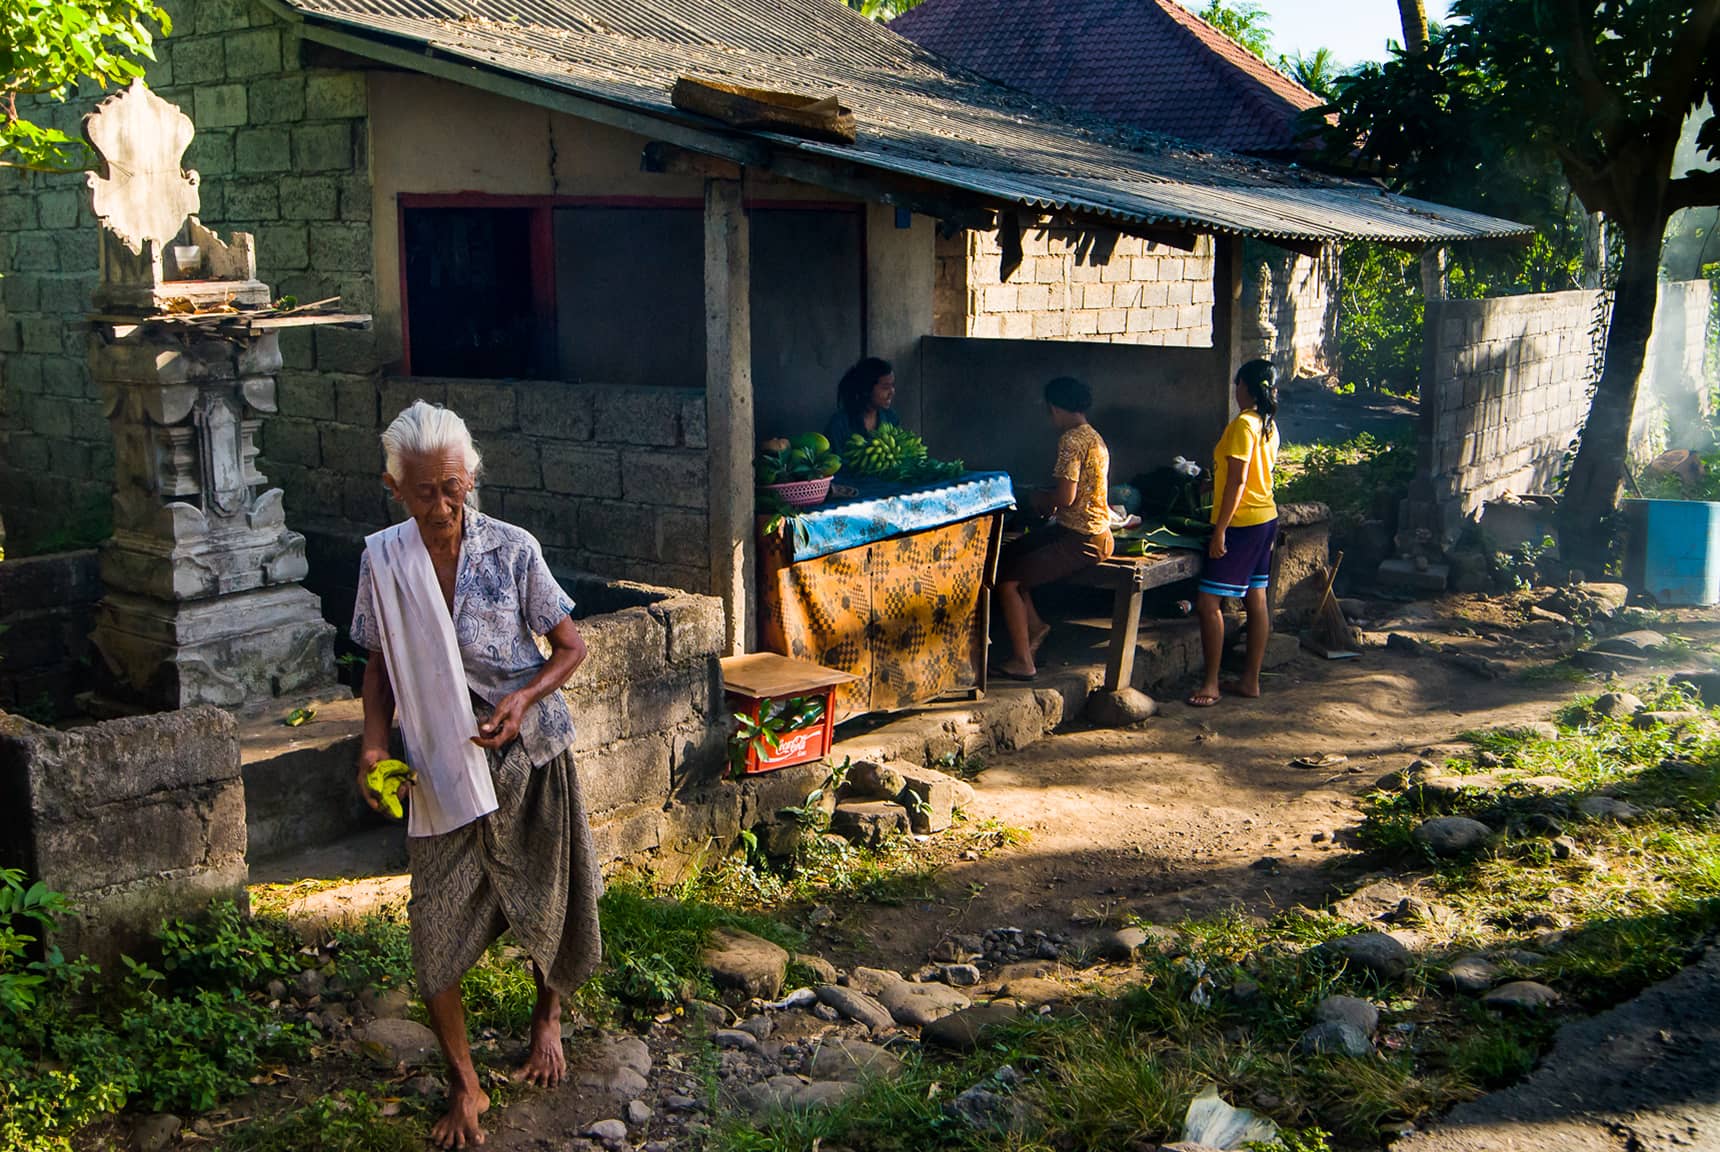 Professional photos of life in traditional Balinese villages - Desa Cepaka